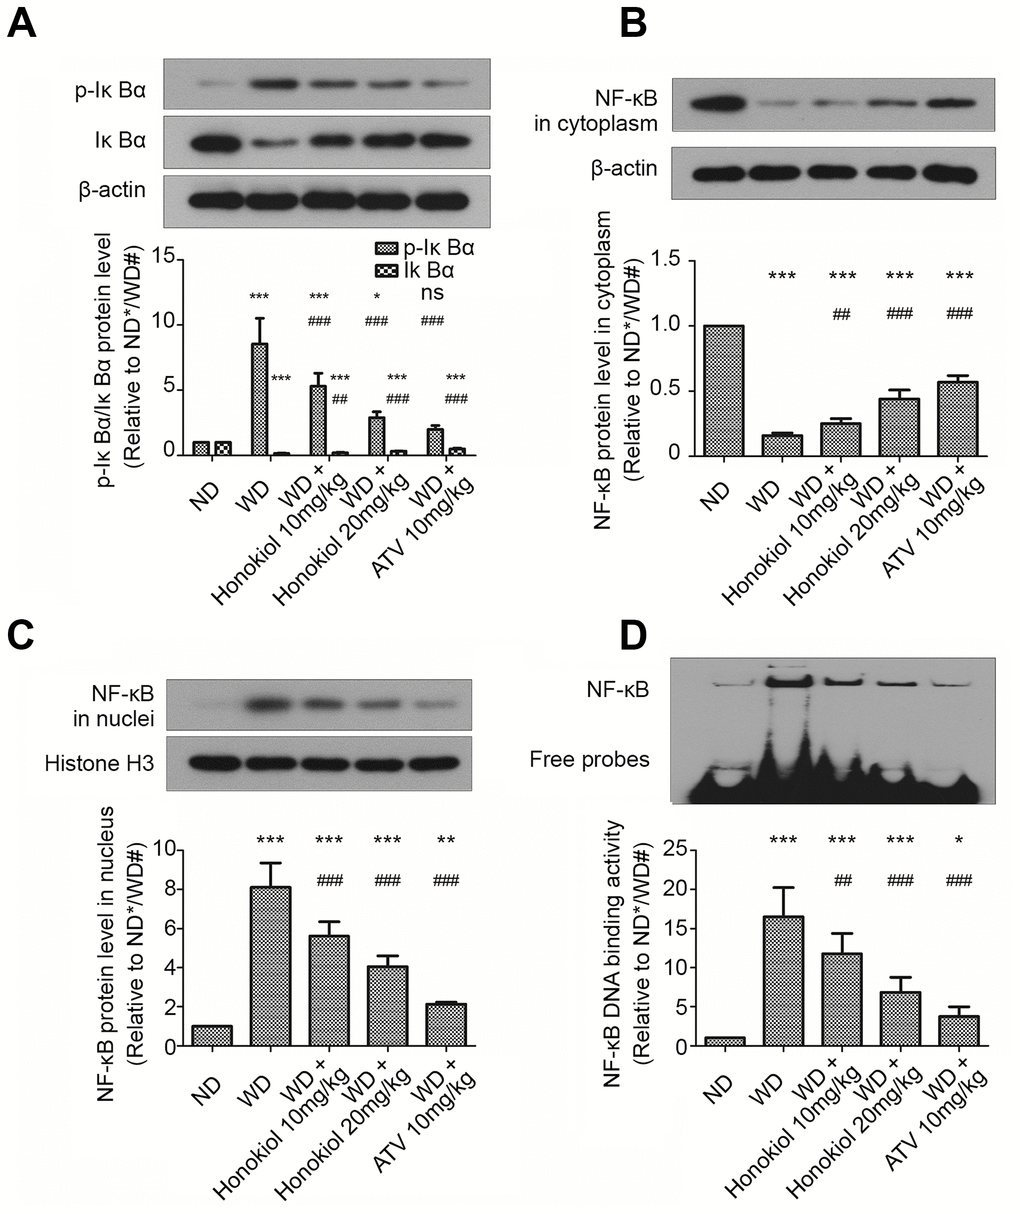 Effect of honokiol on the activation of NF-κB signaling pathway in mice with carotid artery atherosclerosis. (A–C) The protein levels of p-IκBα, IκBα (A), cytoplasmic NF-κB (B), and nuclear NF-κB (C) were assessed by western blotting analysis. β-actin or histone H3 was used as a loading control for cytoplasmic or nuclear protein, respectively. (n = 6; * P P P P P P D) The DNA binding activities of NF-κB in carotid tissue from the indicated groups were detected by EMSA assay. (n = 6; * P P P P P P 